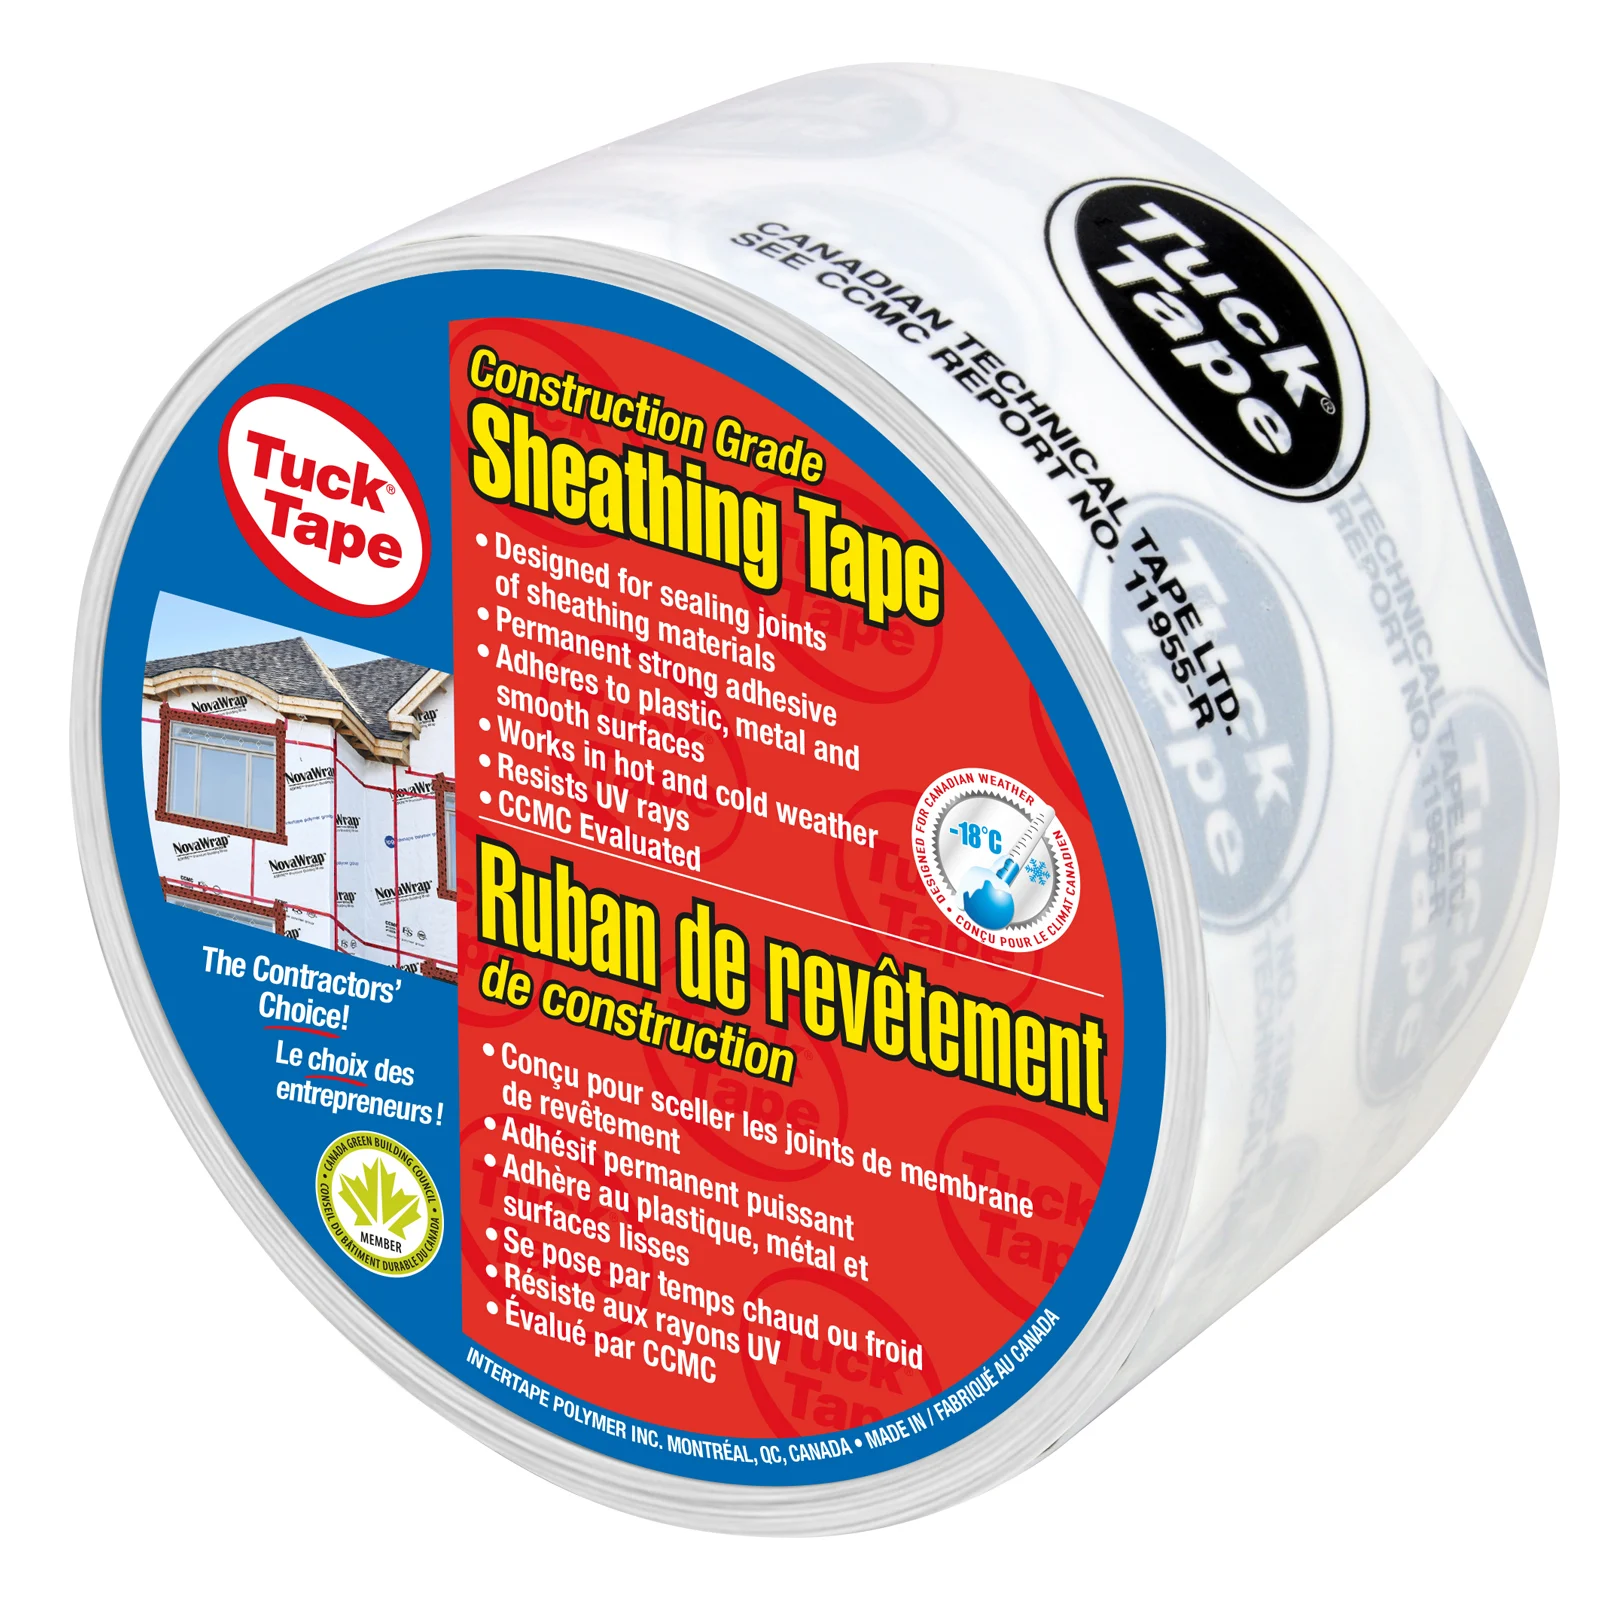 Construction and sheathing tape